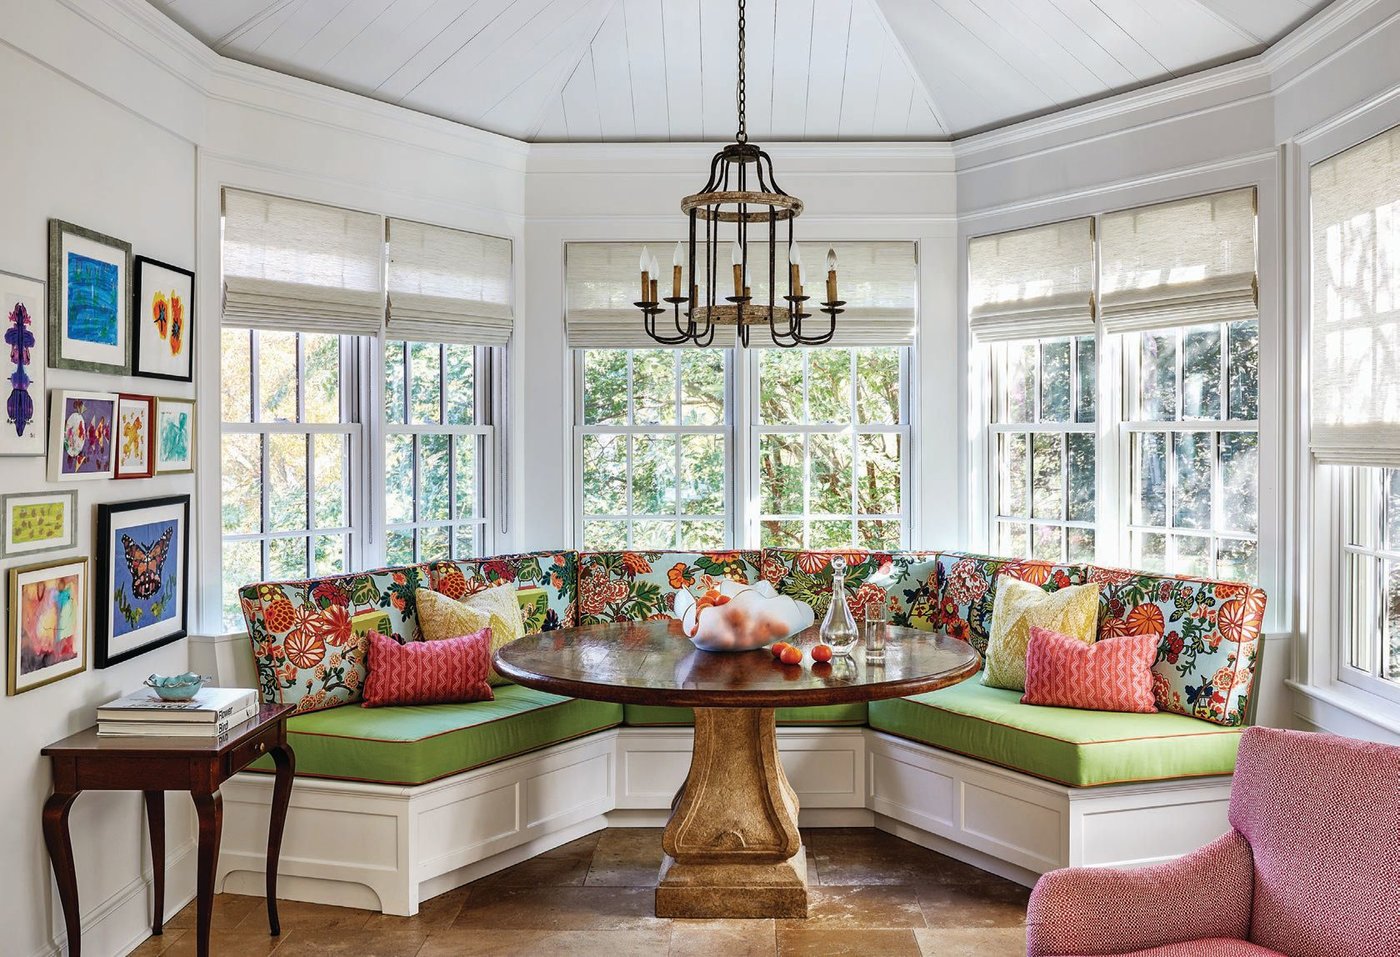 The sunroom-kids’ den is a bright example of brilliant fabrics complementing family art. PHOTOGRAPHED BY STACY ZARIN GOLDBERG